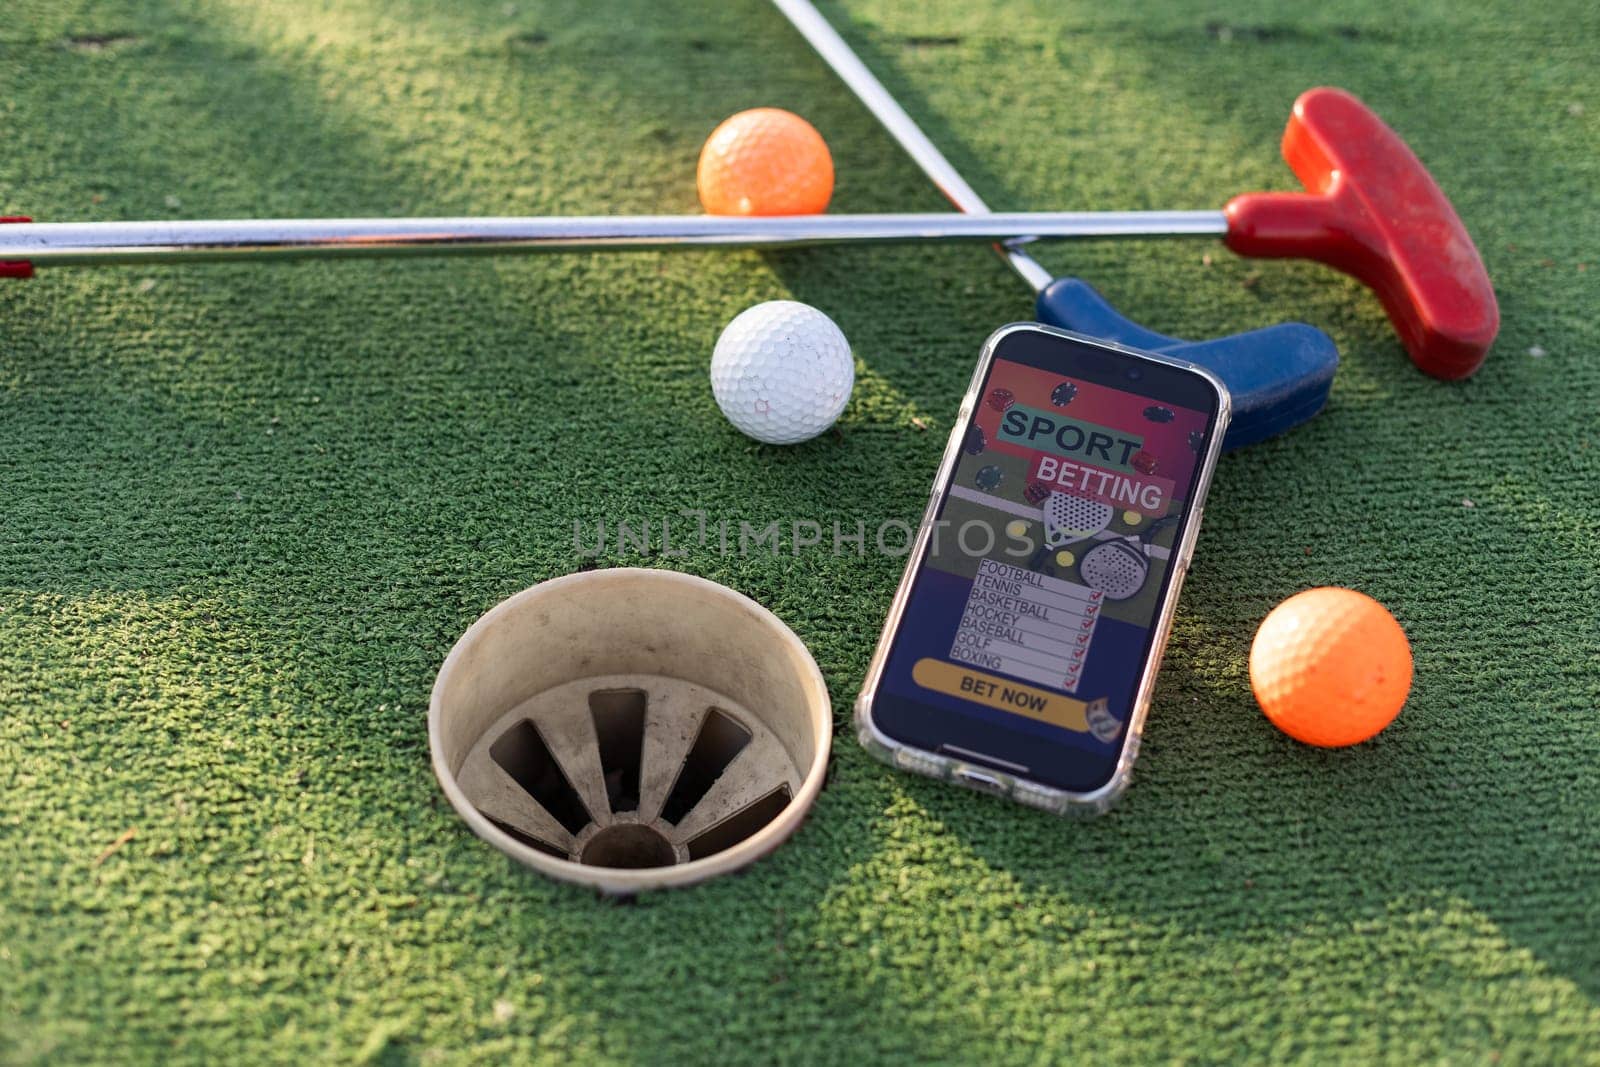 golf equipment on the green lawn. mini golf sports betting on a smartphone by Andelov13